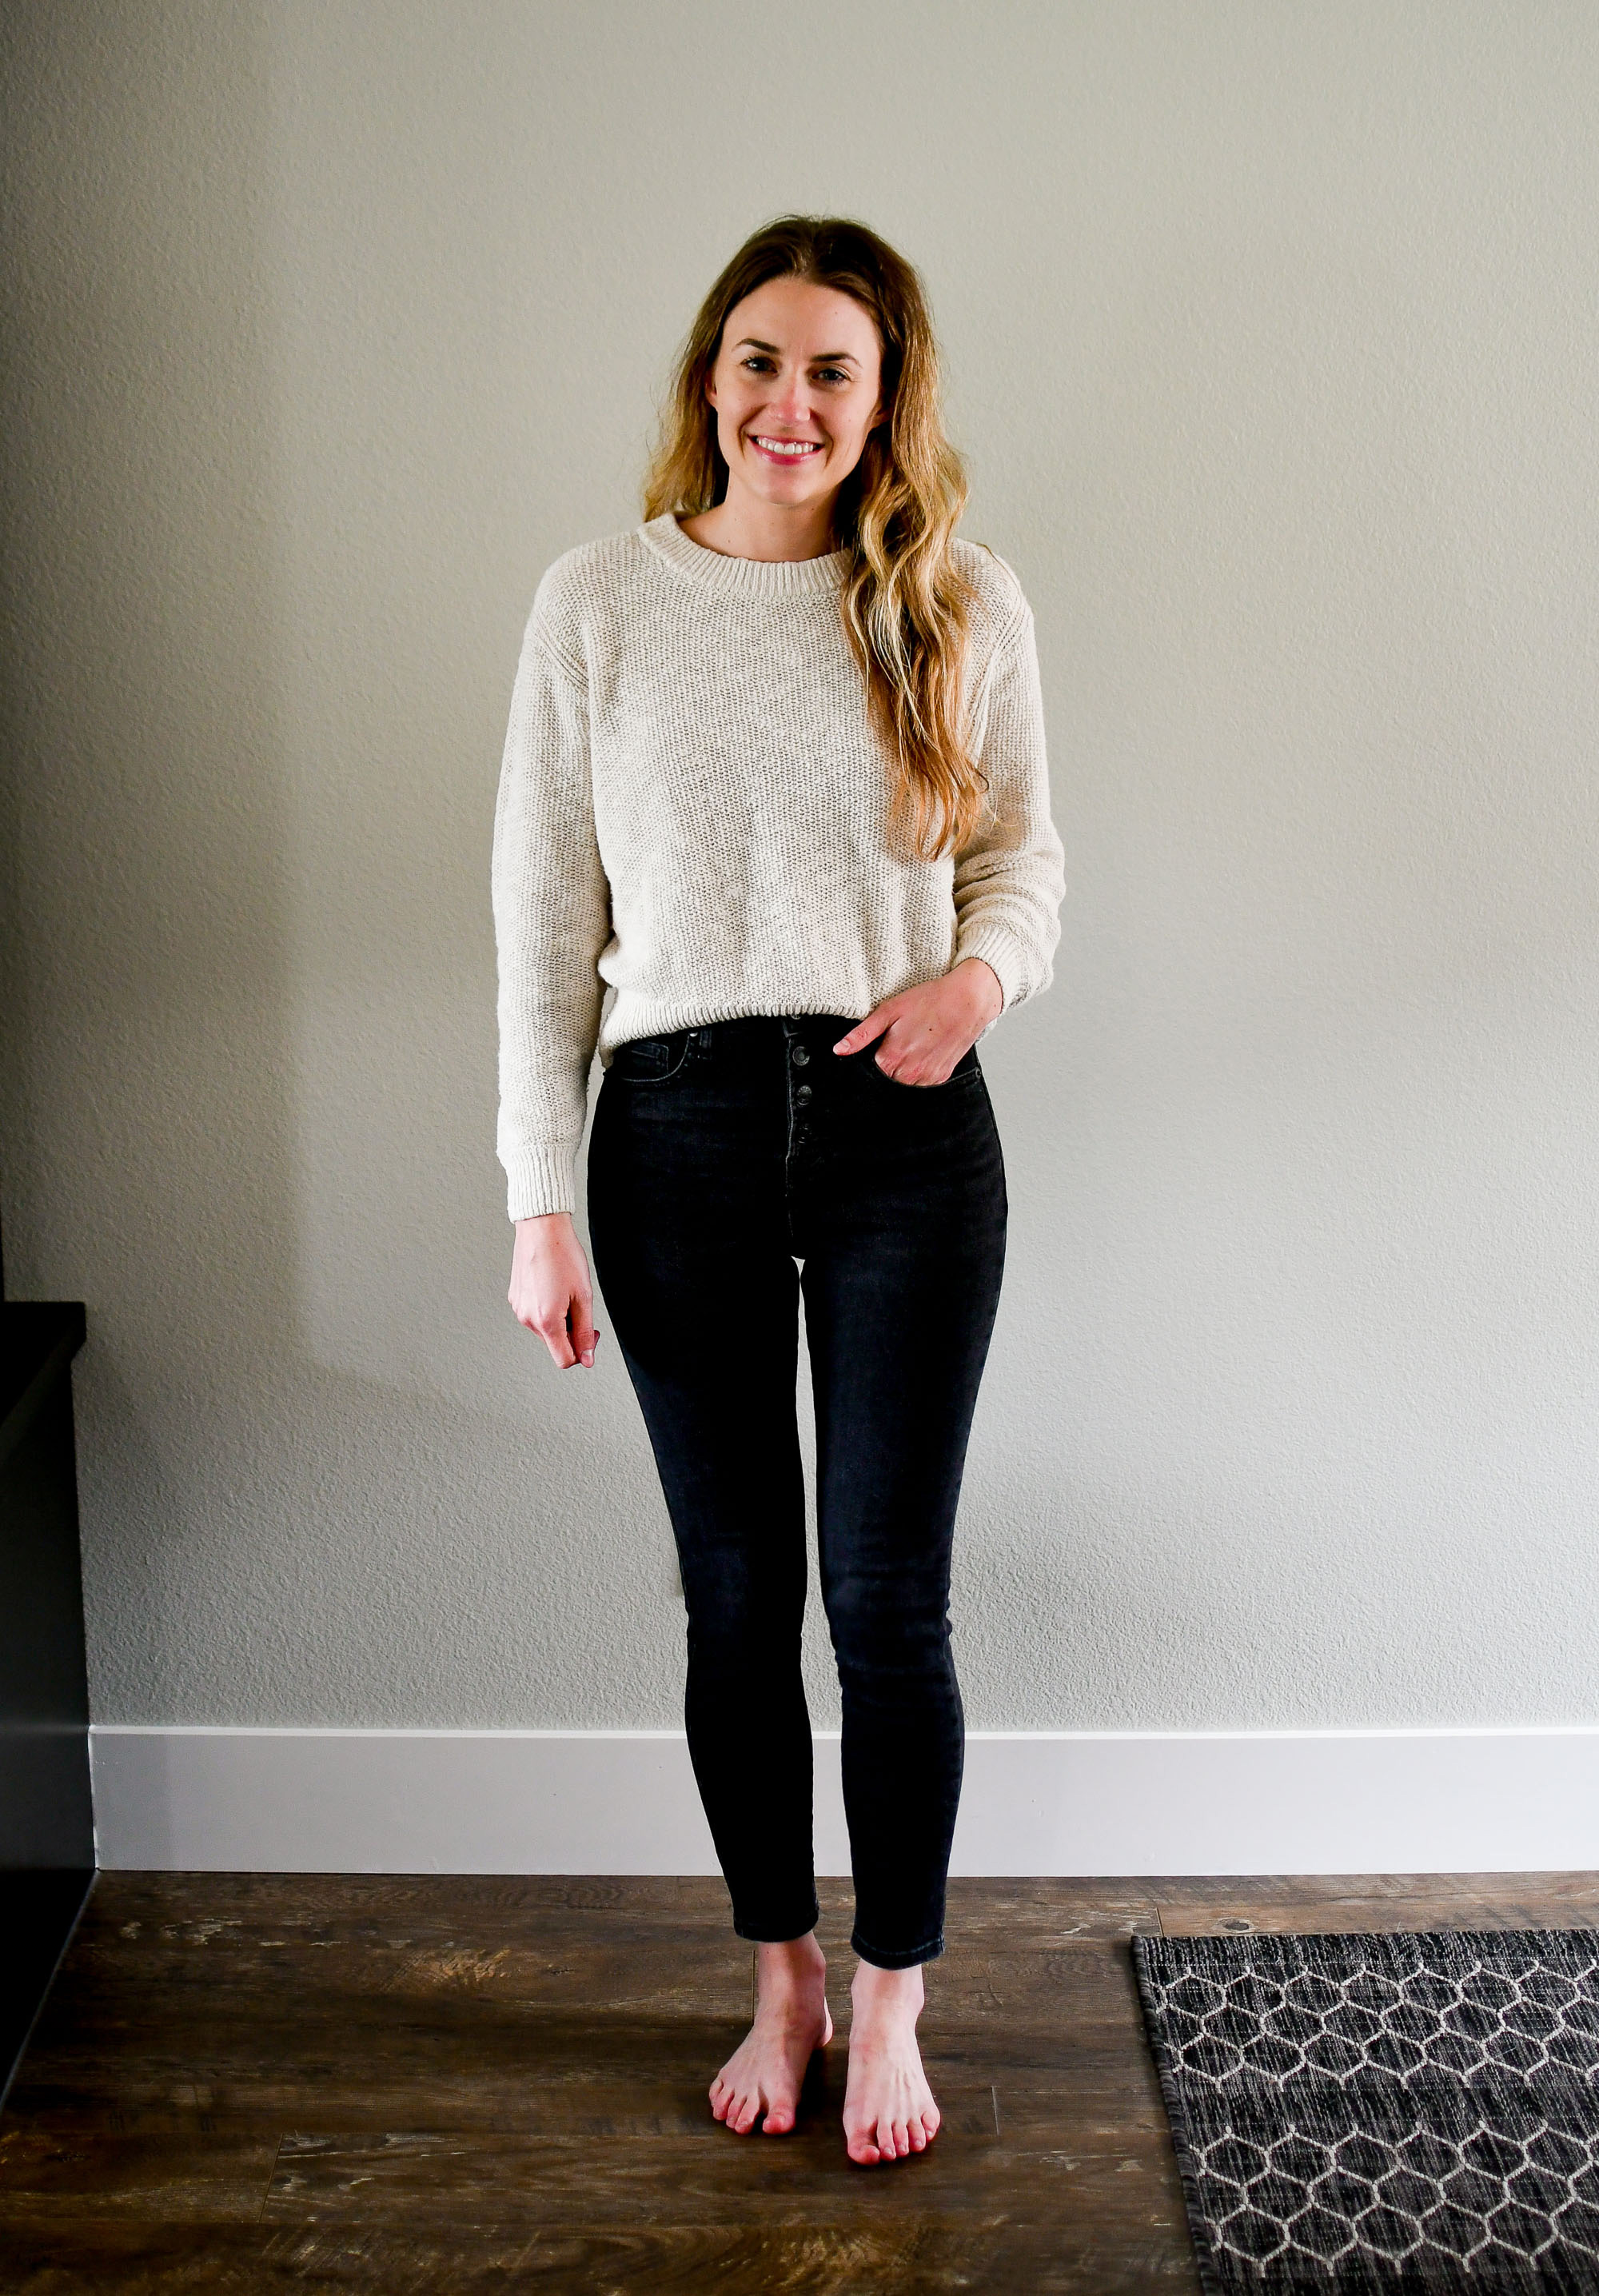 everlane button fly jeans